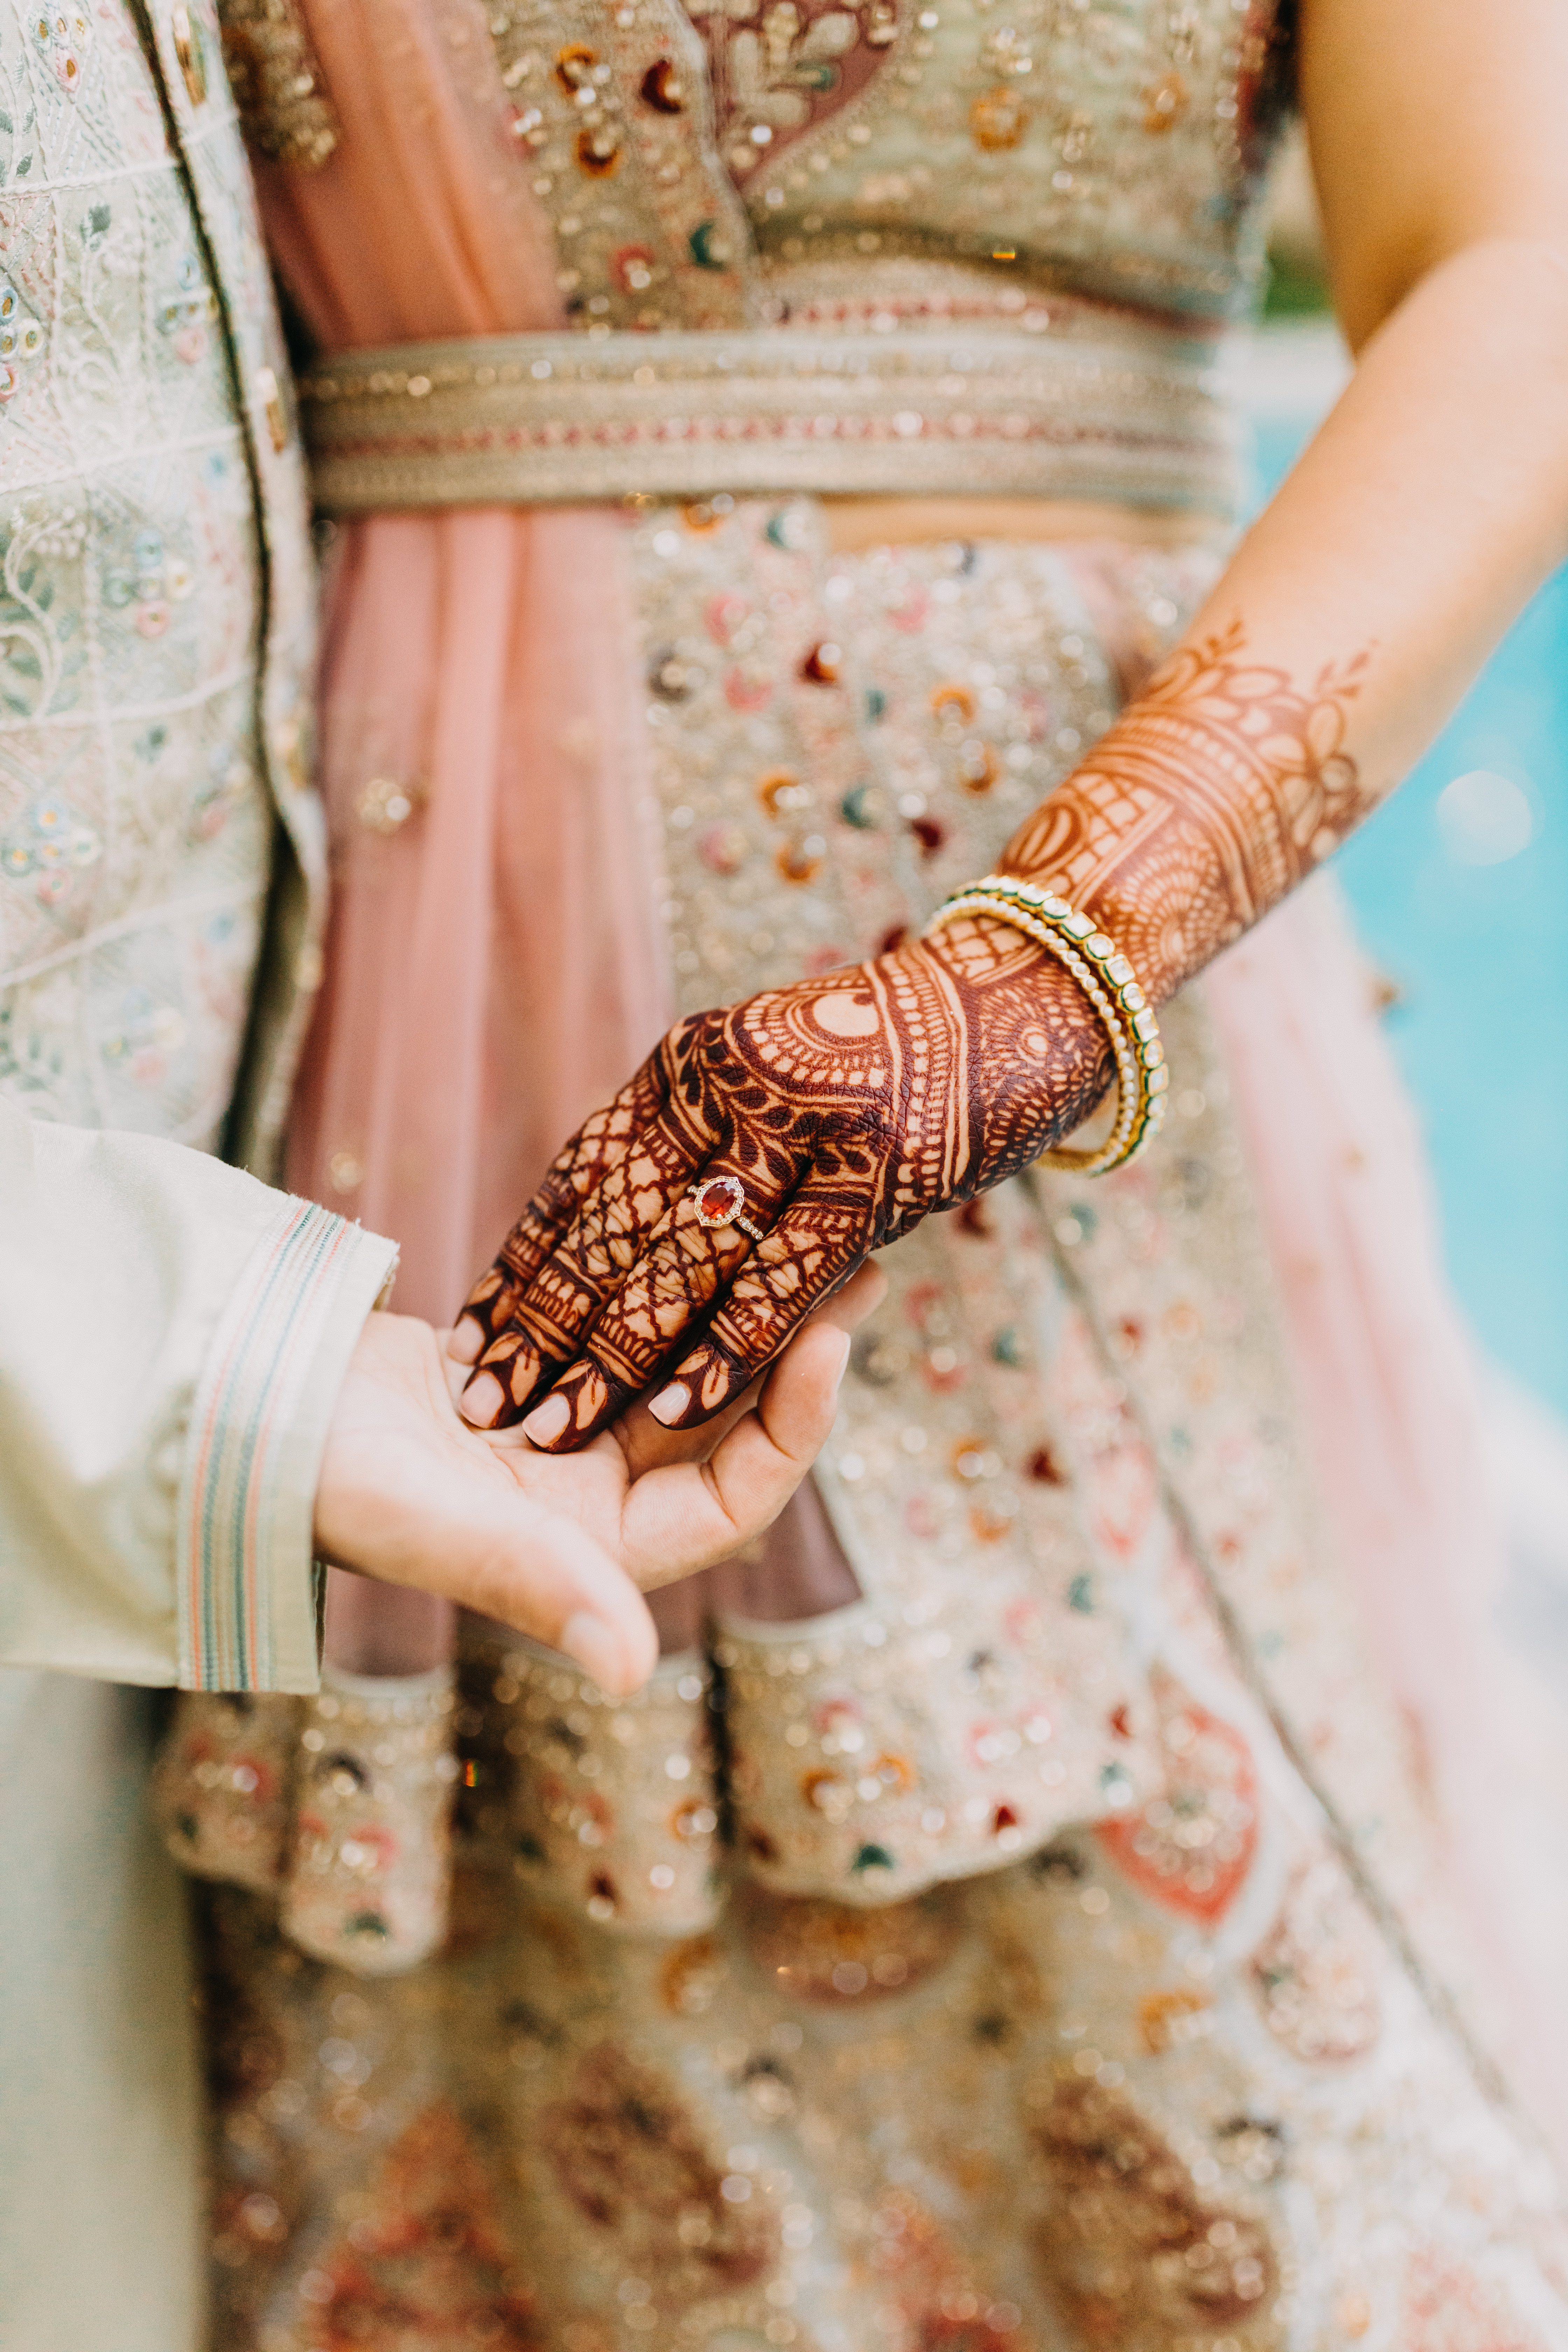 A gorgeous bride donned in henna across her arms.